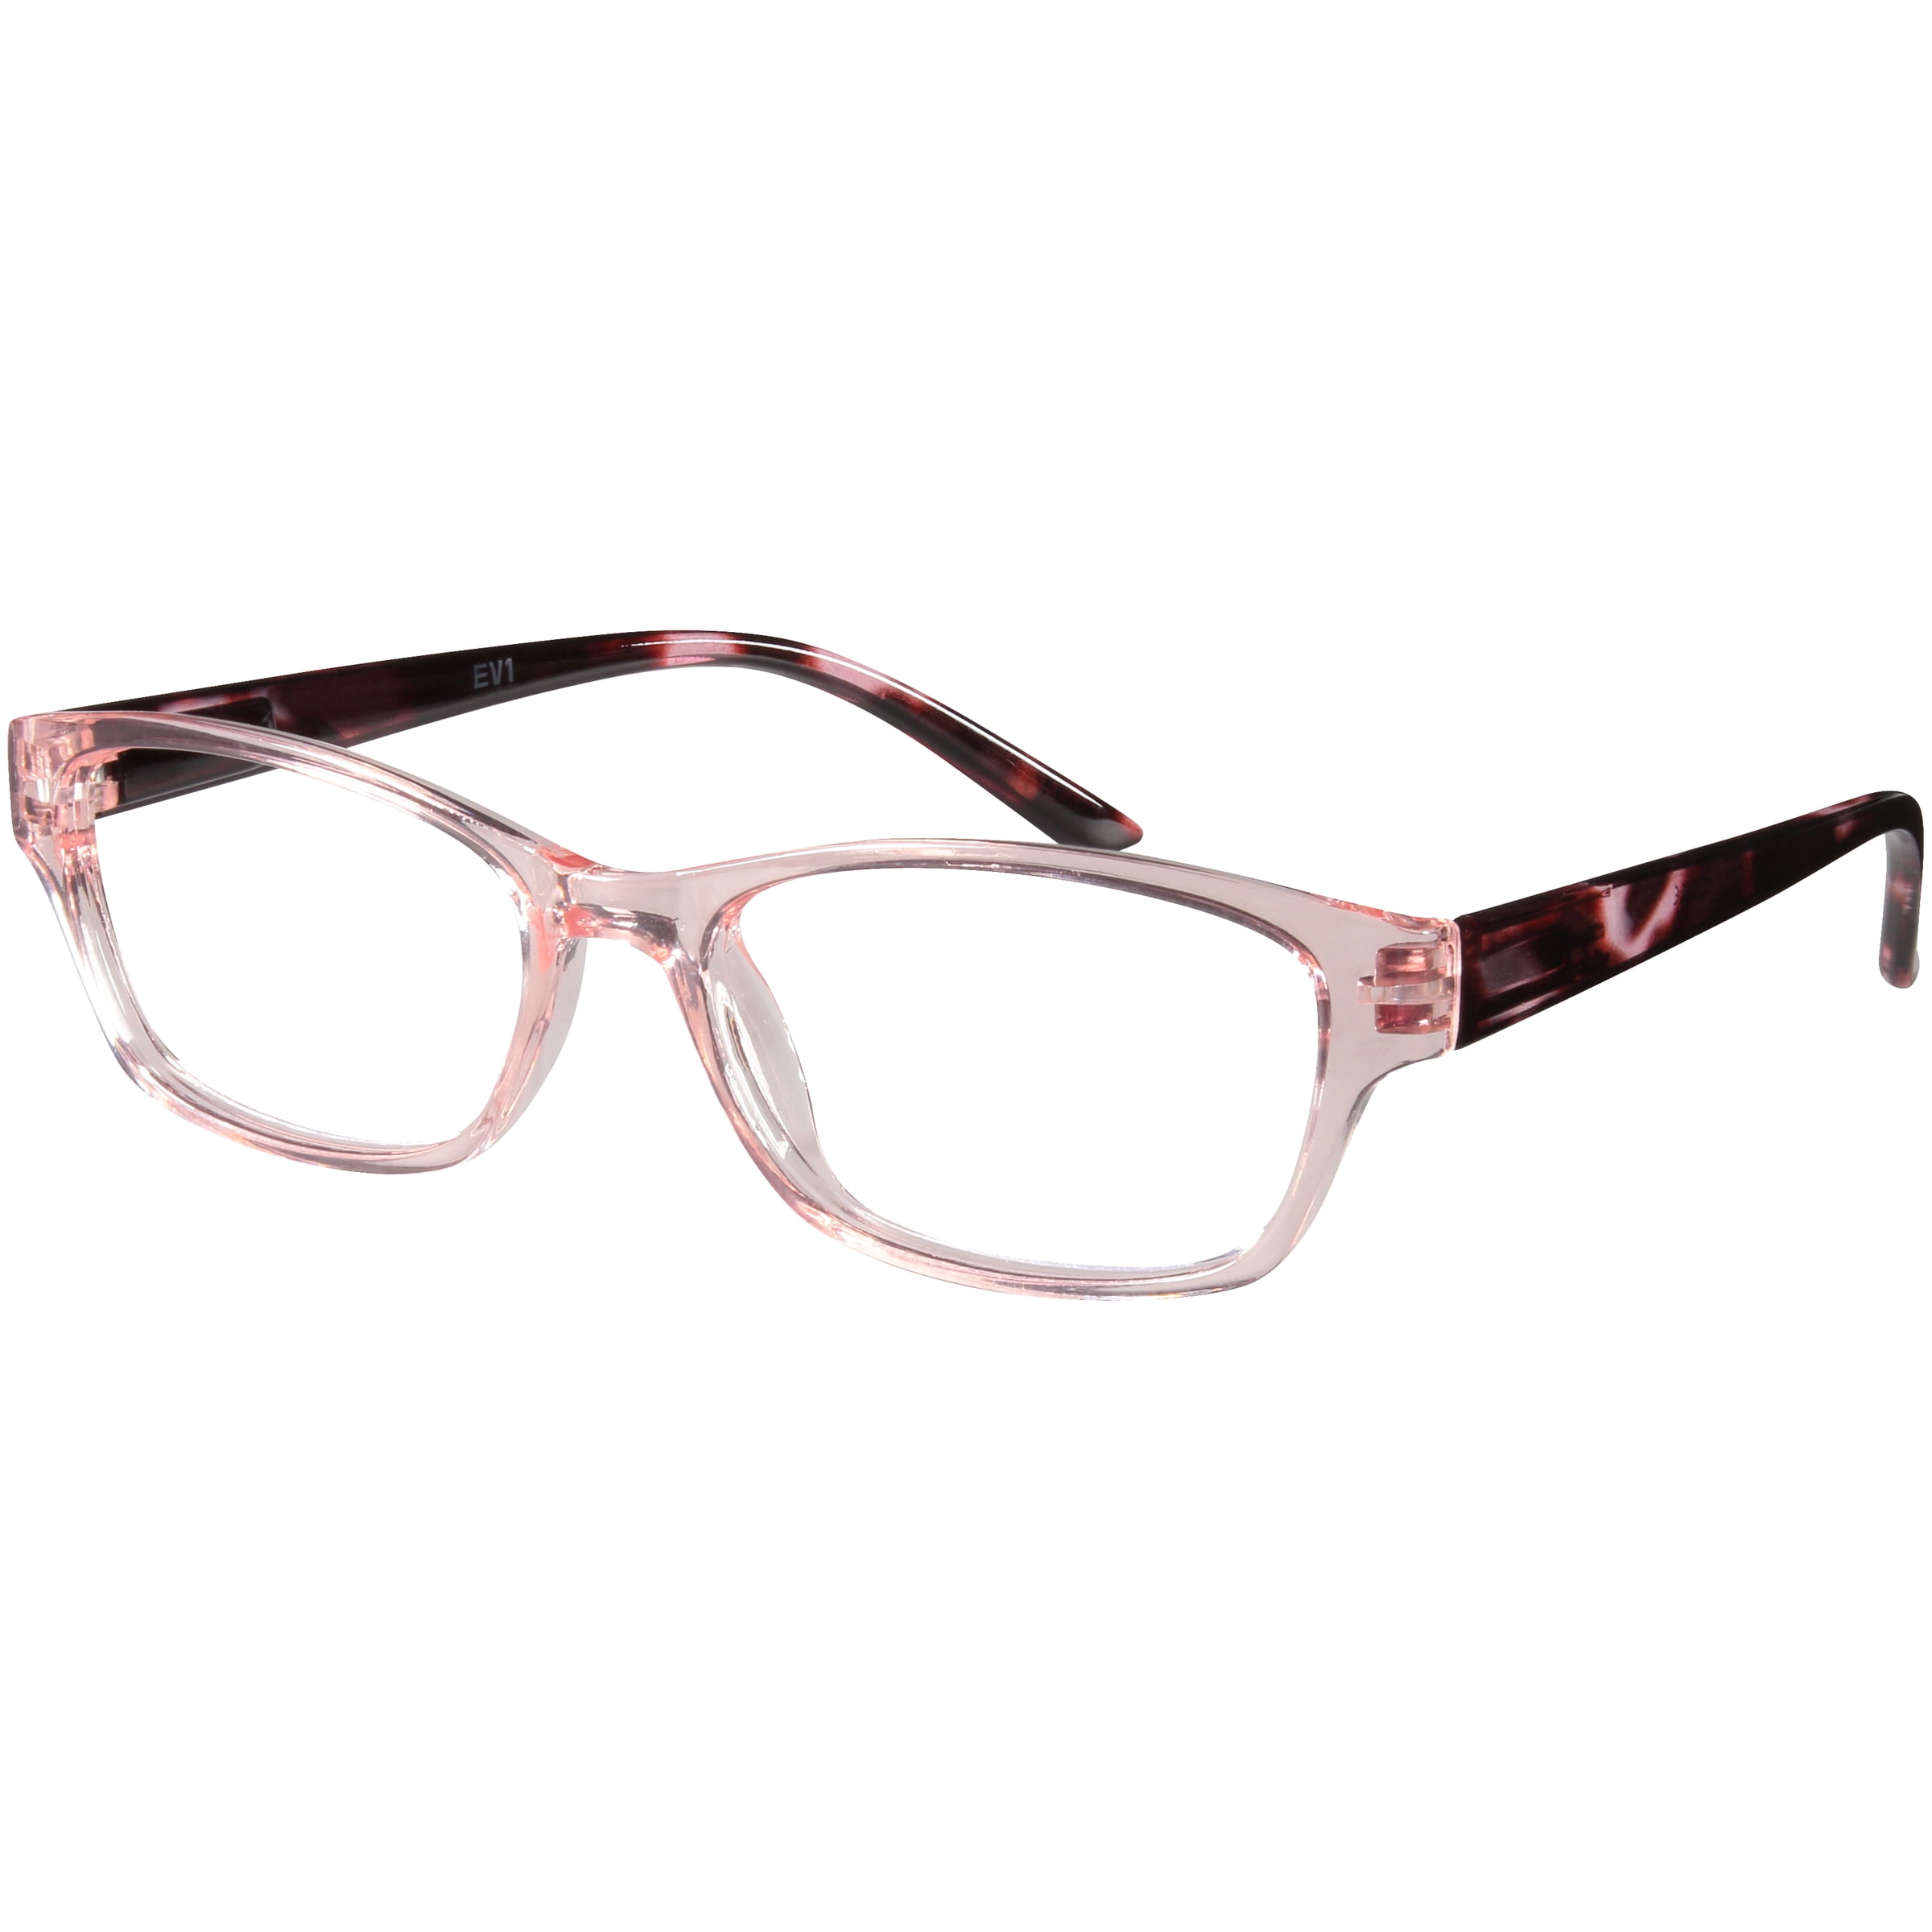 EV1 Dolly Crystal Pink +3.00 Reading Glasses with Case